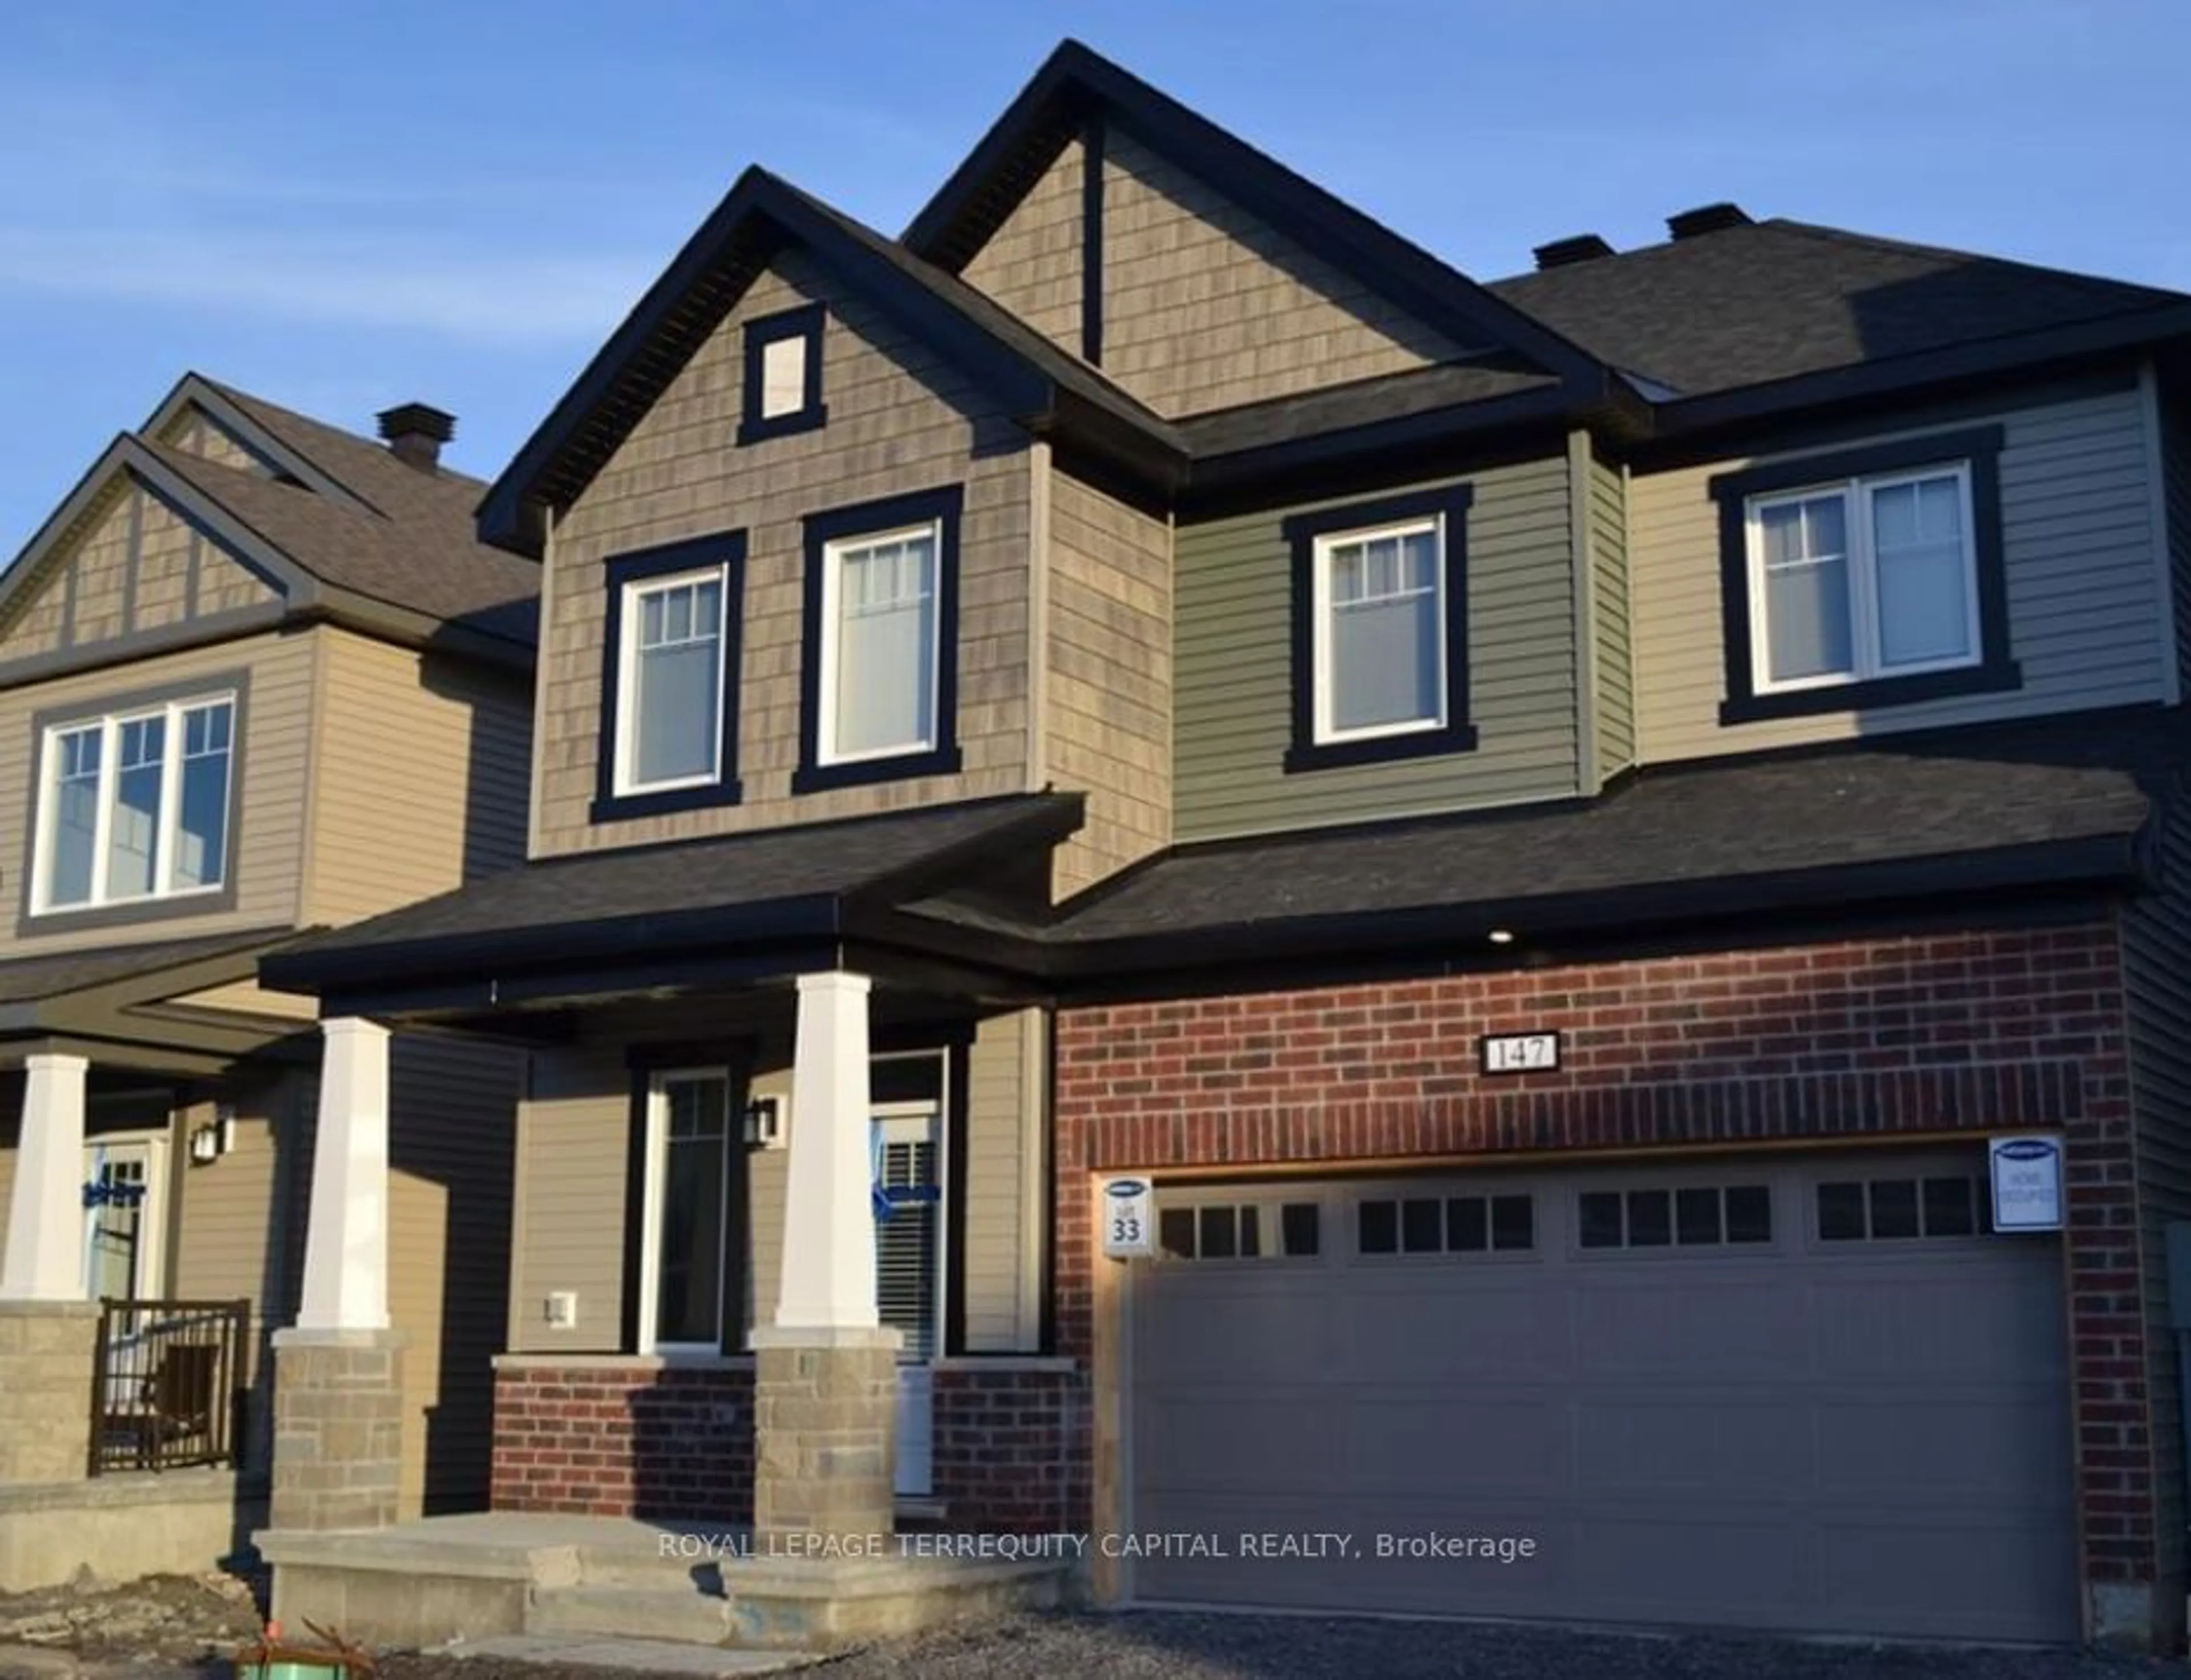 Home with brick exterior material for 147 Unity Pl, Ottawa Ontario K2S 2Y8